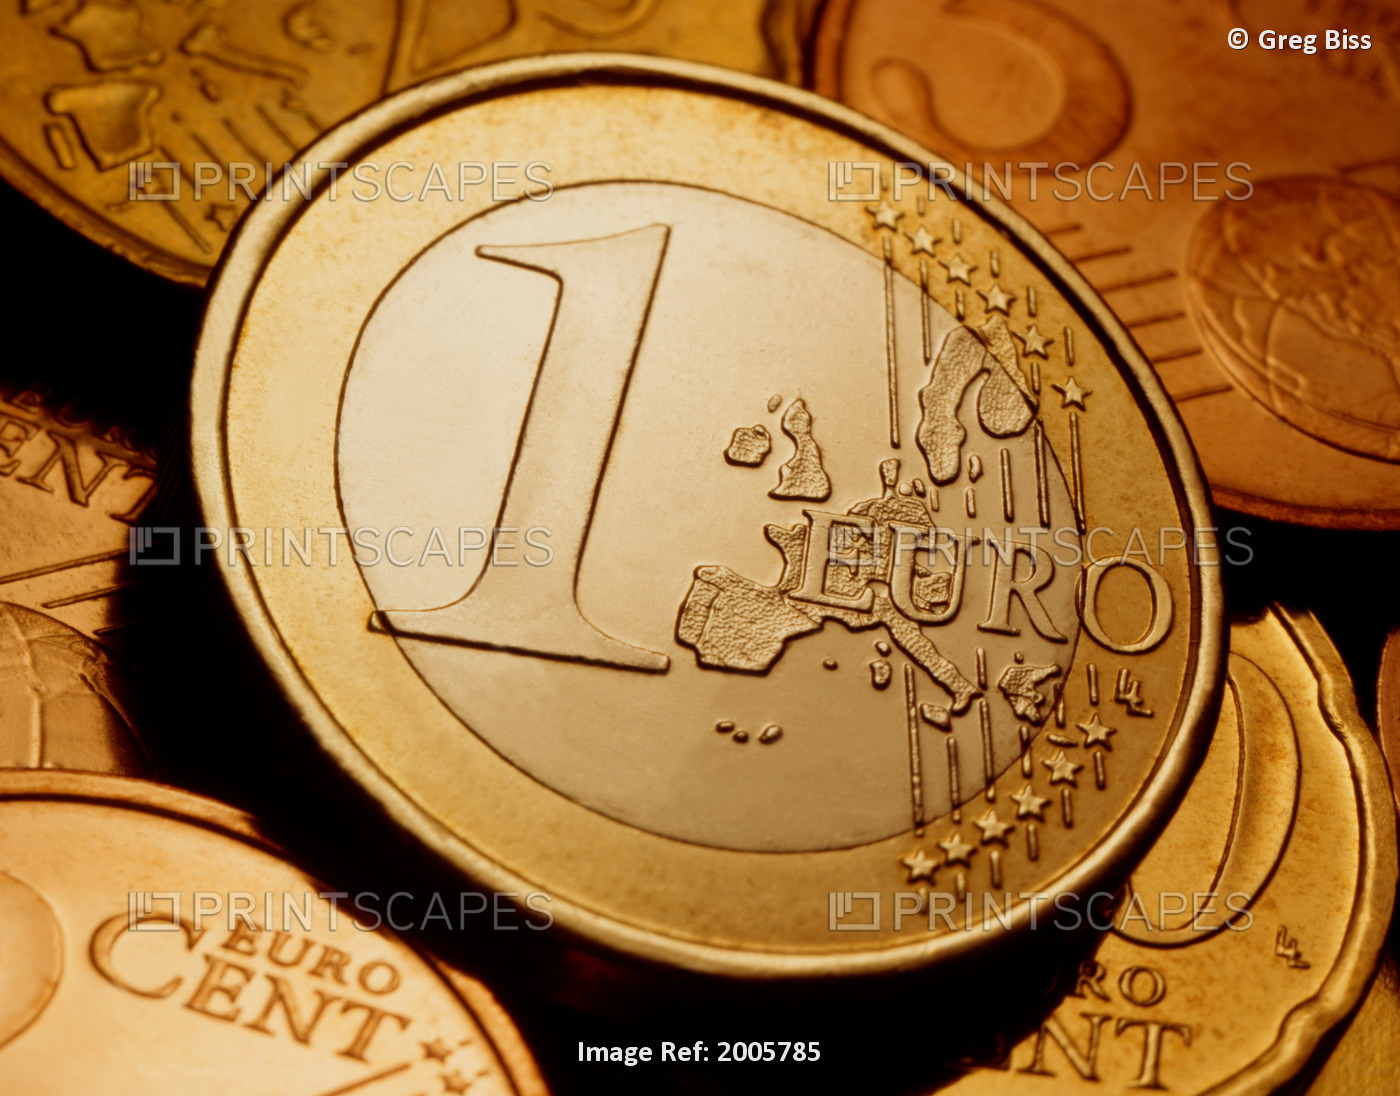 G.Biss Photography; Euro Coins